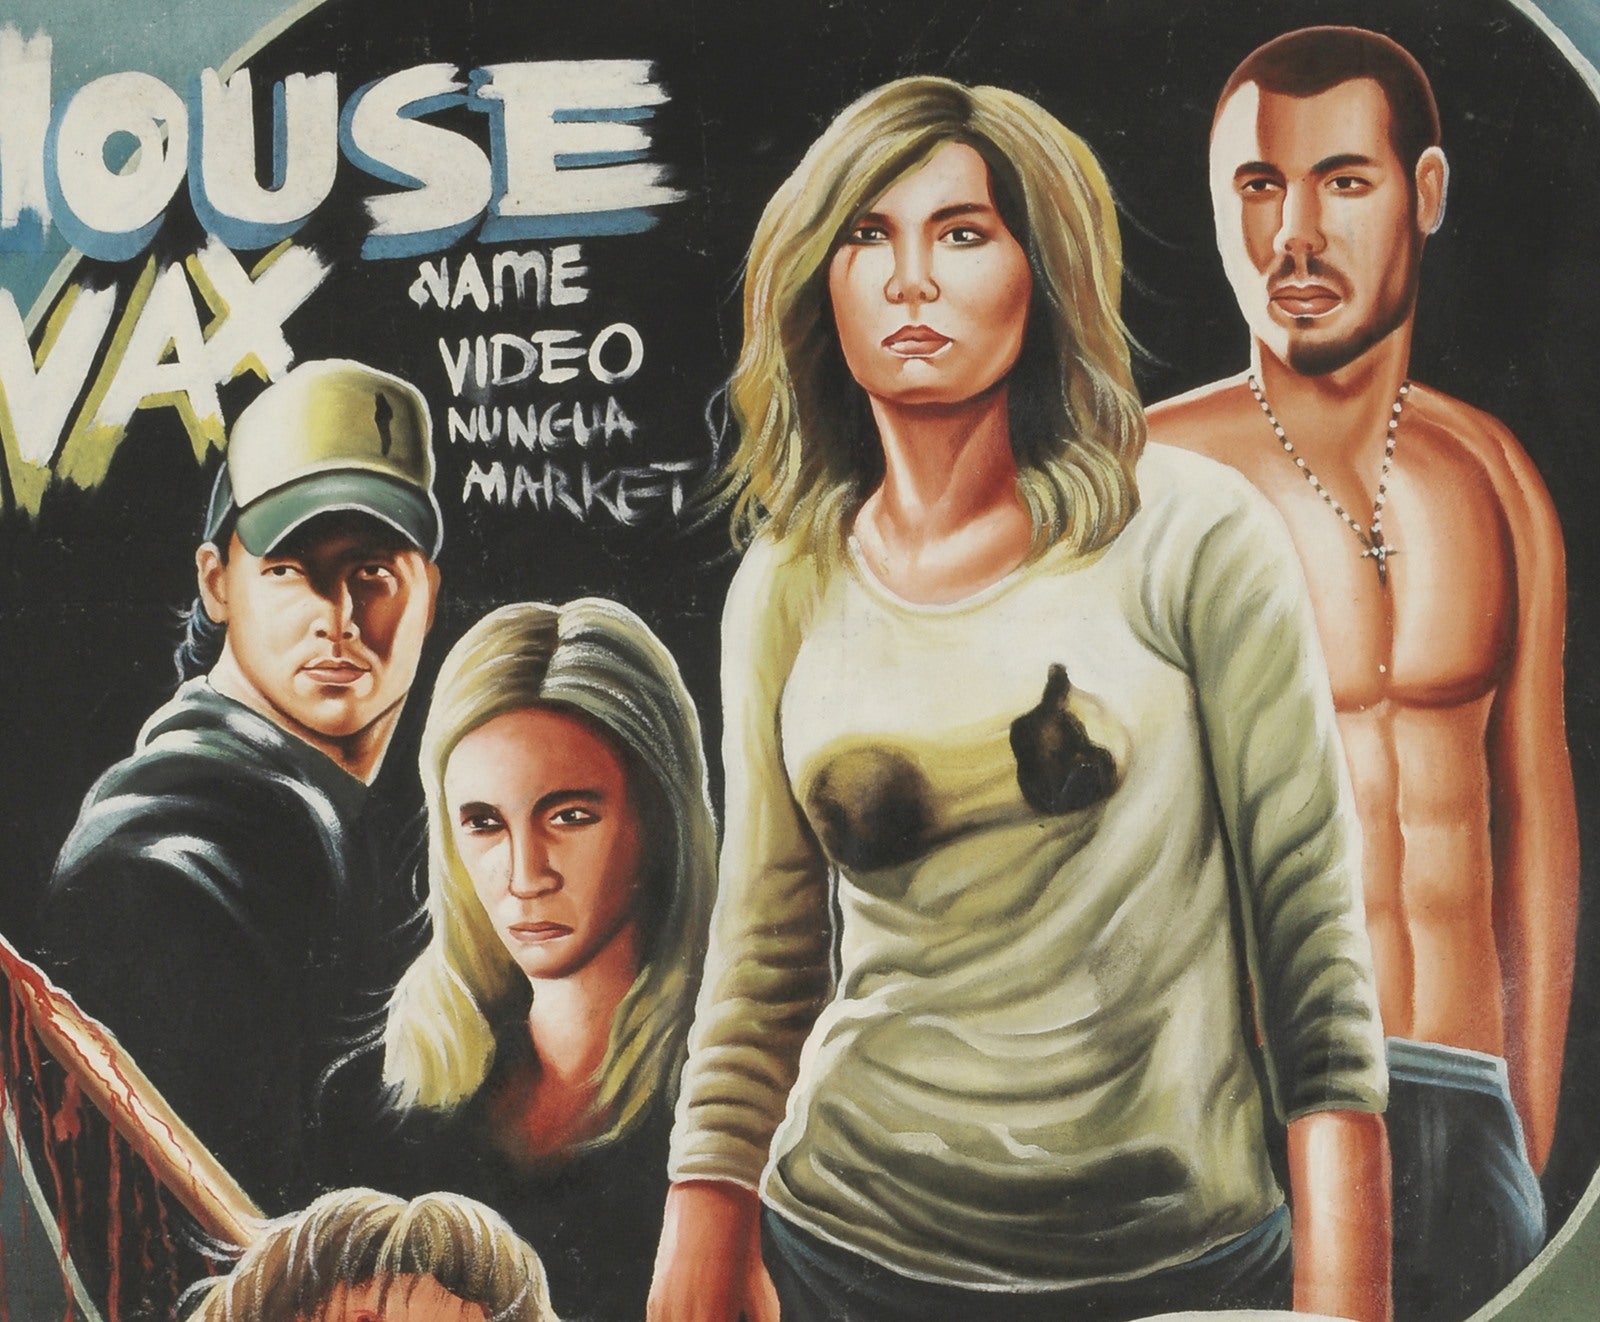 HOUSE OF WAX MOVIE POSTER HAND PAINTED ON RECYCLED FLOUR SACK IN GHANA FOR THE LOCAL CINEMA DETAILS